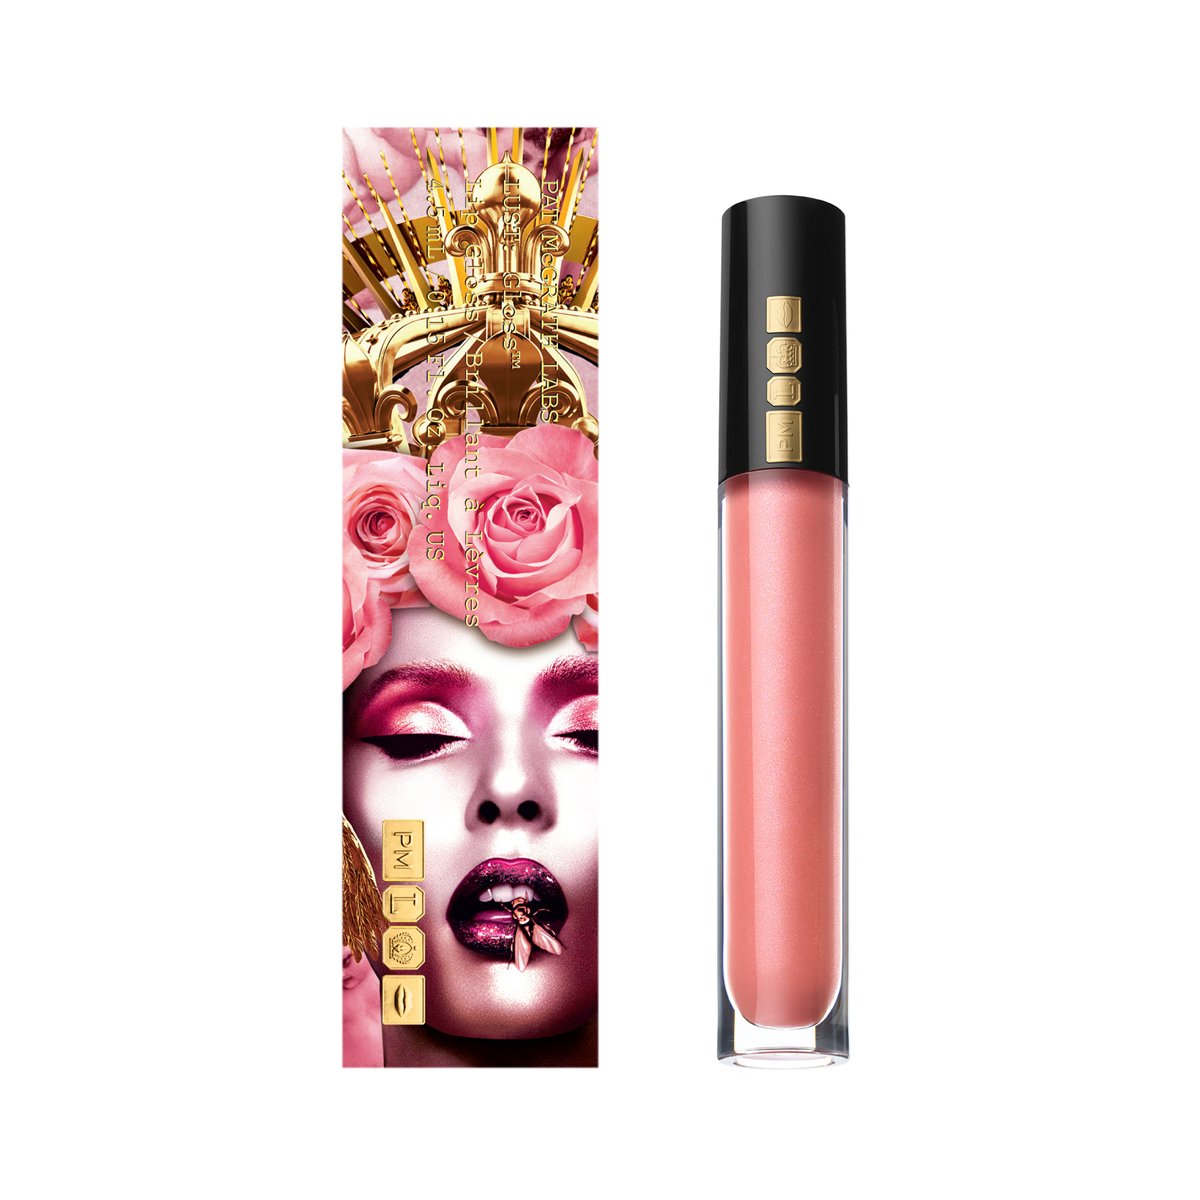 Pat McGrath Lust: Gloss Lip Gloss Divine Rose Limited Edition  - Peach Perversion (Pale Peach with Iridescent Pearl)